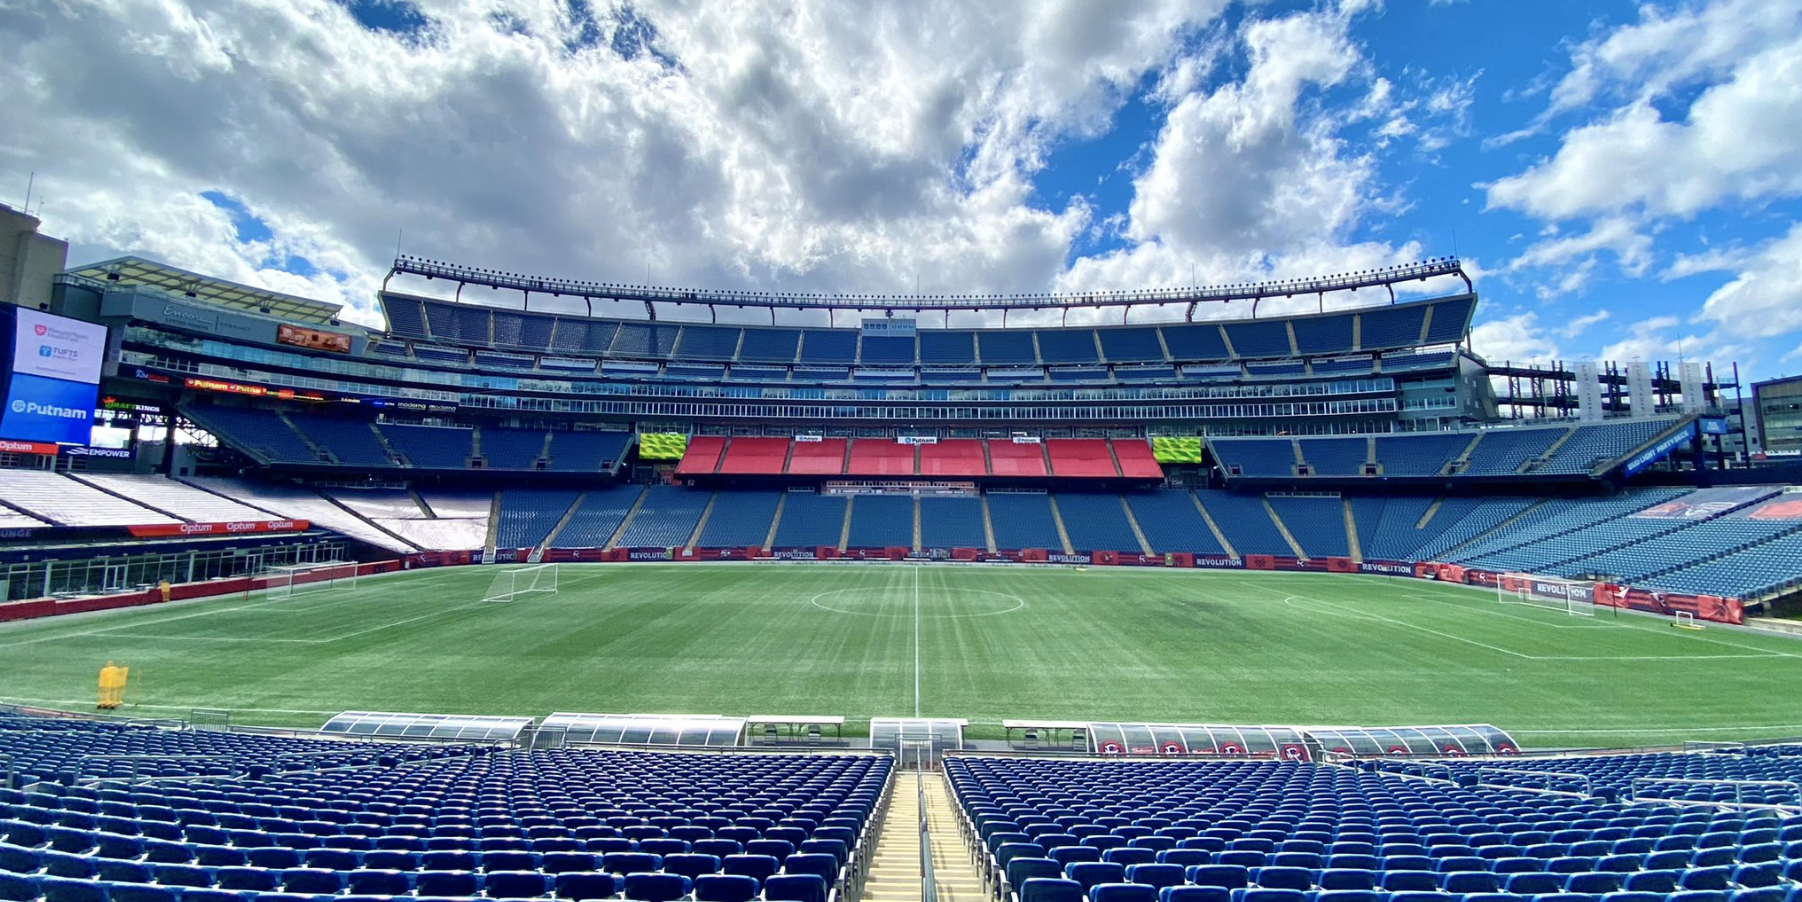 Will RI benefit from 2026 World Cup in nearby Foxboro?